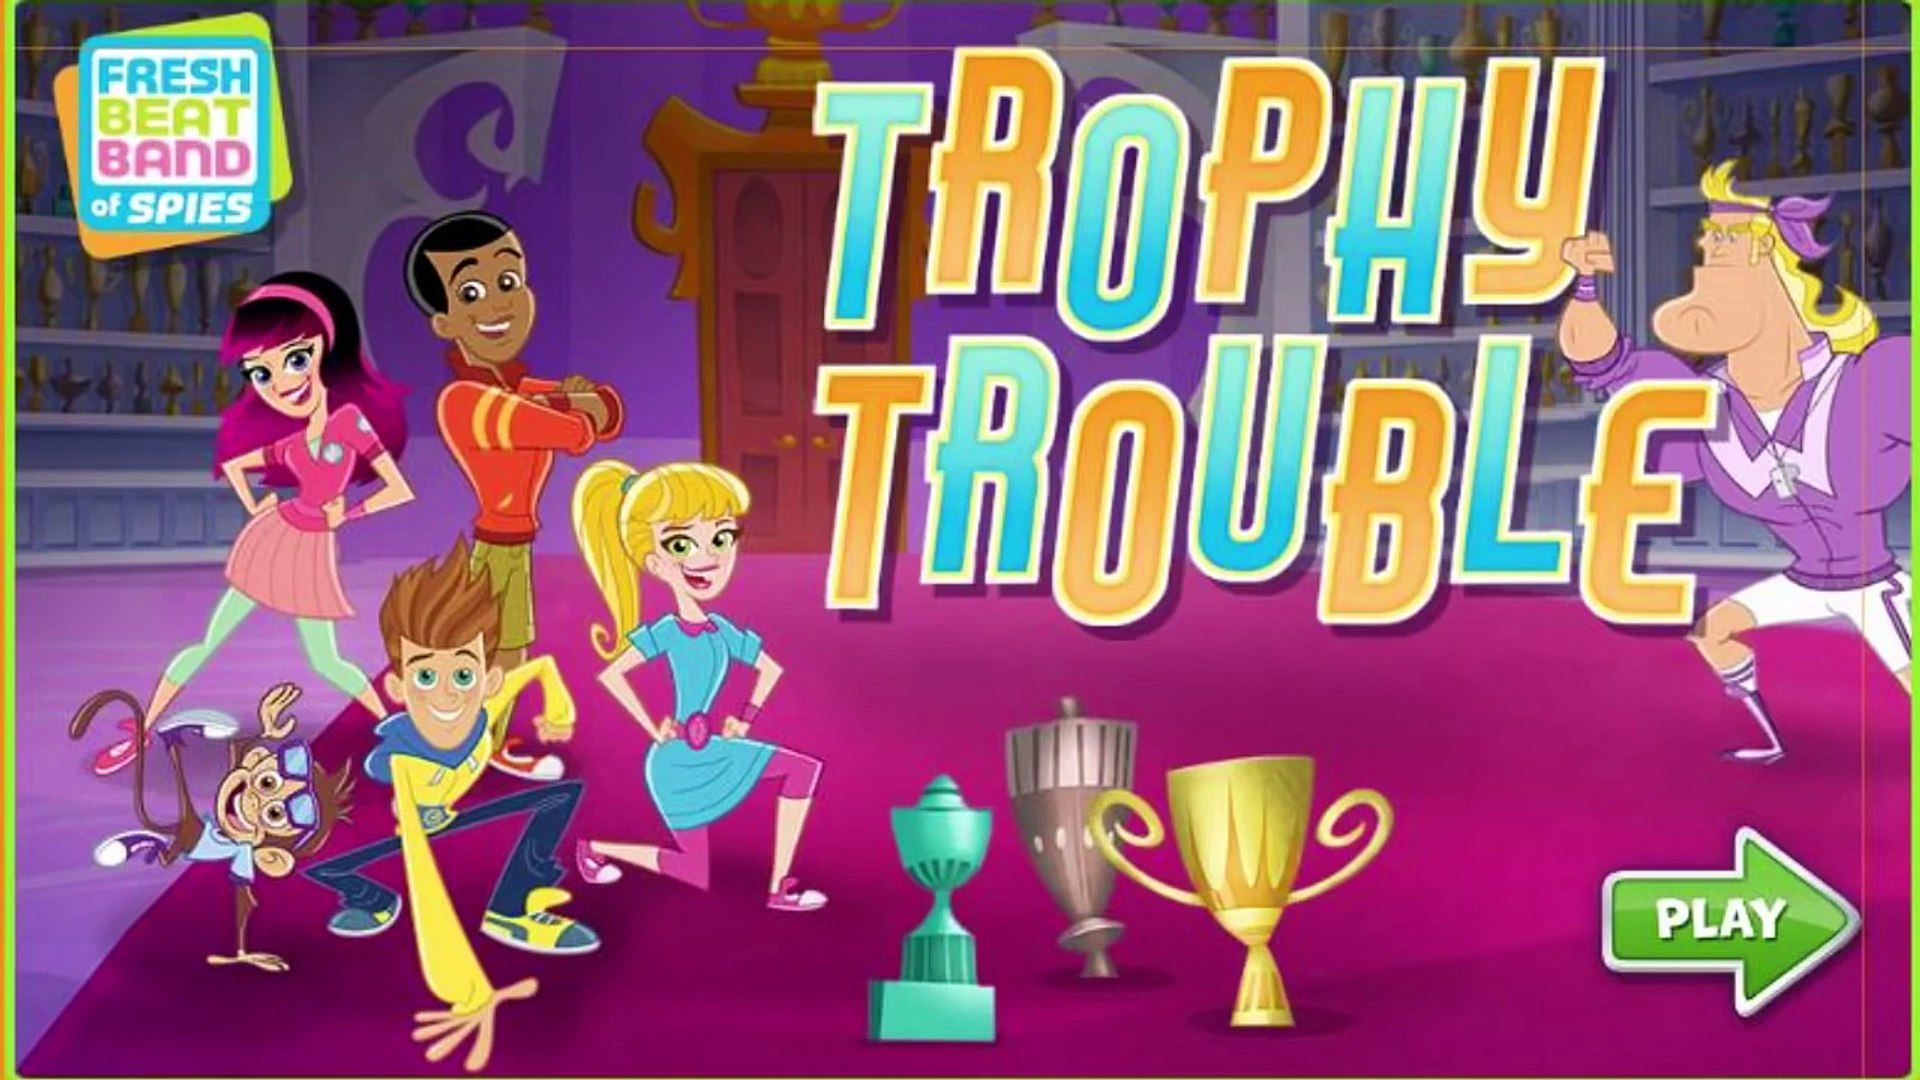 Fresh Beat Band of Spies - Trophy Trouble - Full HD Game in English - Nick  Junior - Episodes 1 – Видео Dailymotion